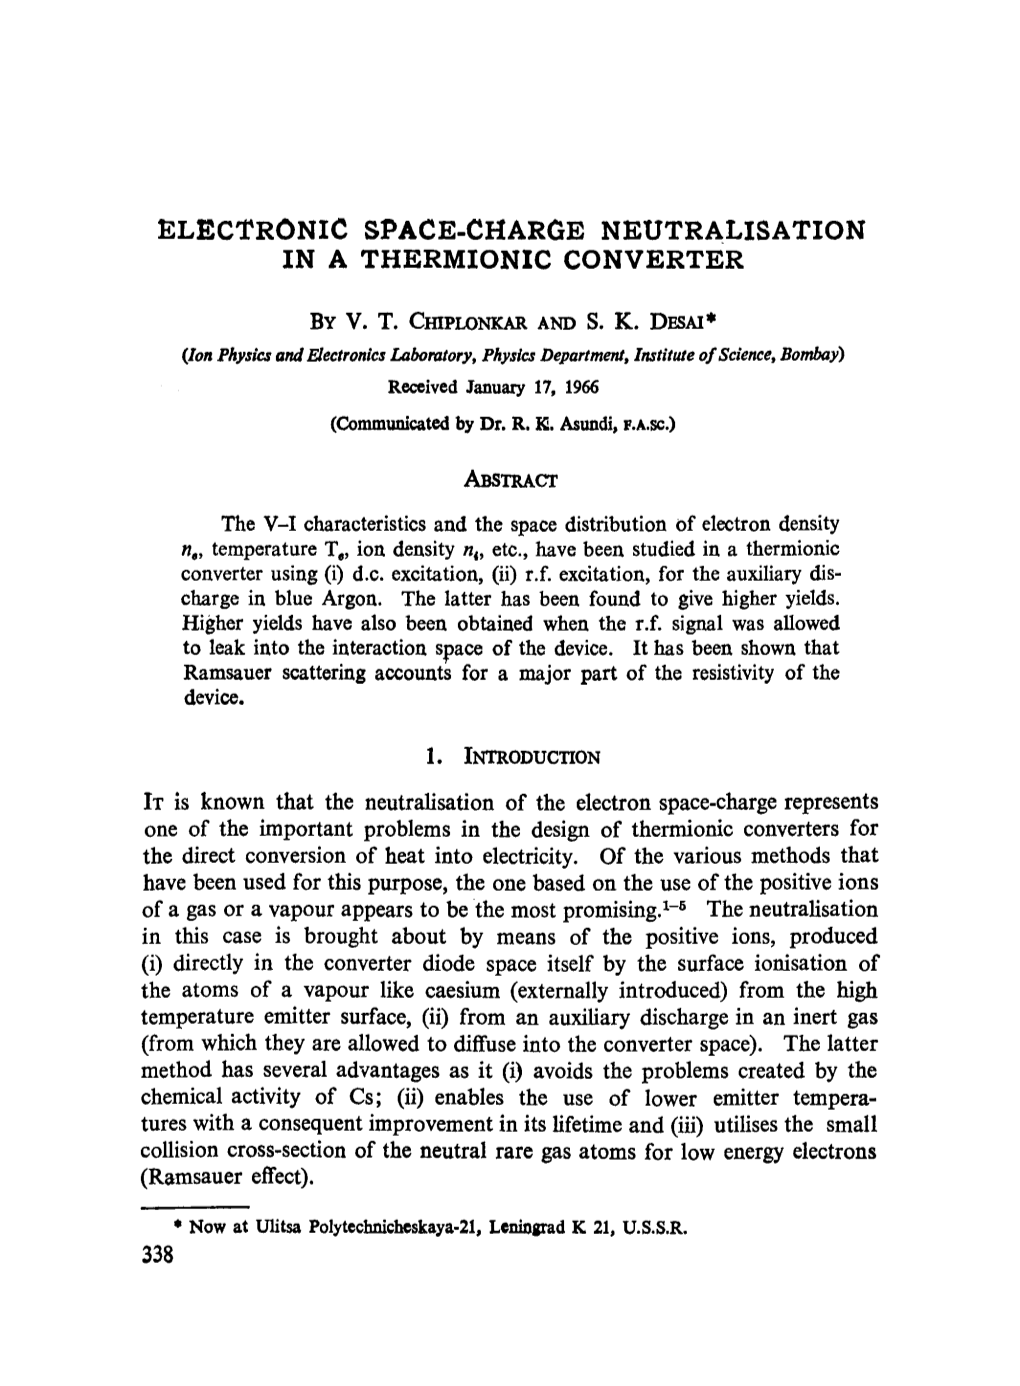 Electronic Space-Charge Neutralisation in a Thermionic Converter